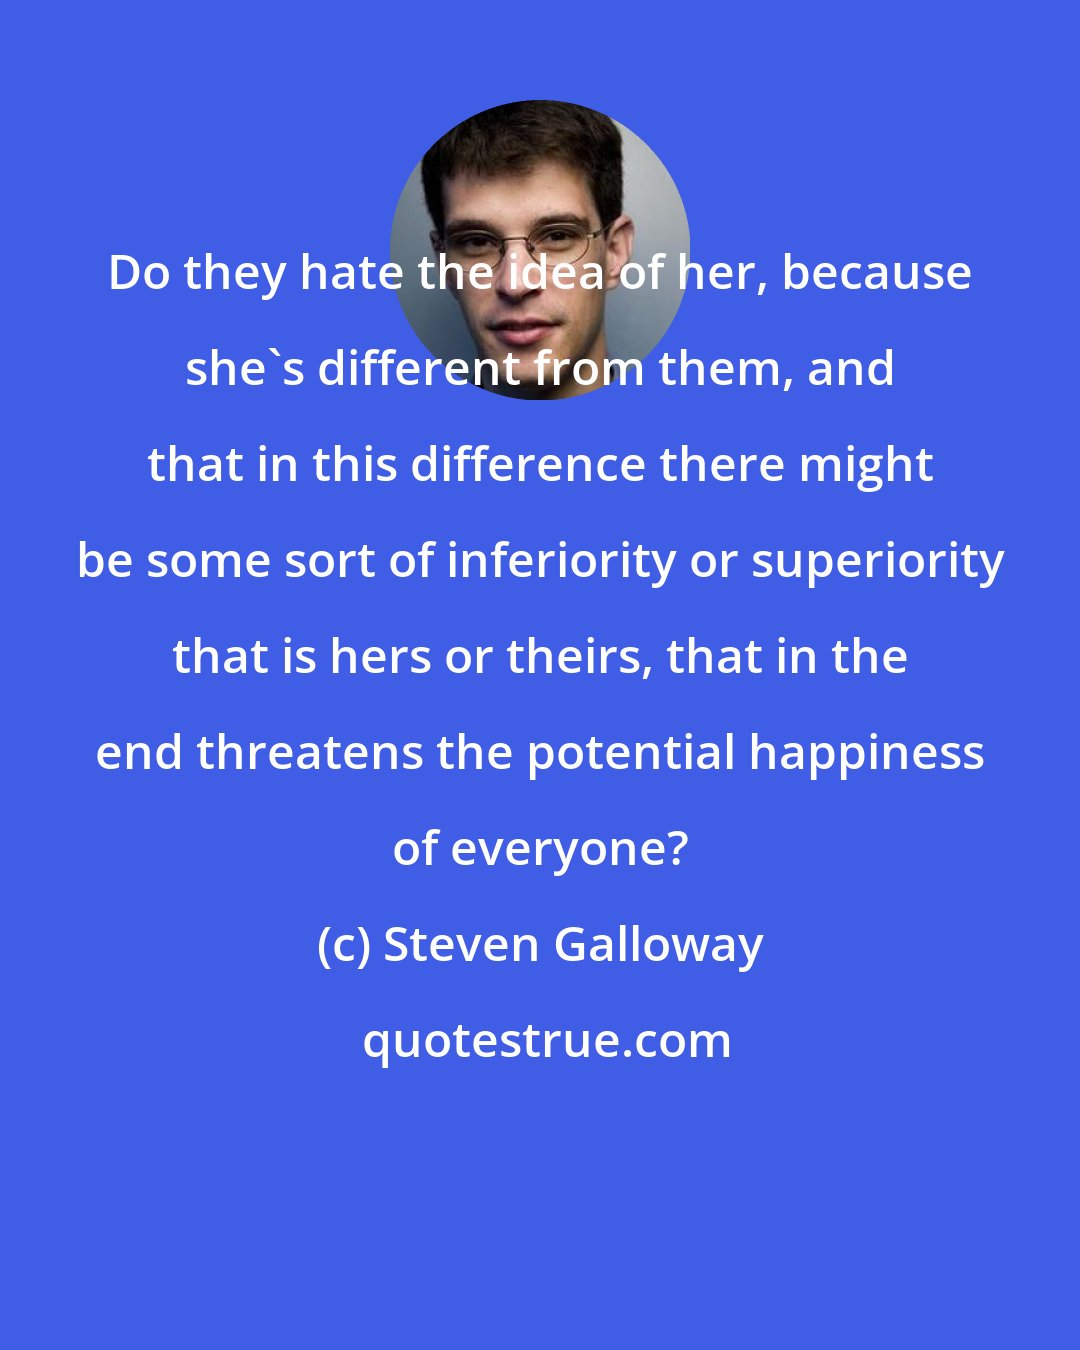 Steven Galloway: Do they hate the idea of her, because she's different from them, and that in this difference there might be some sort of inferiority or superiority that is hers or theirs, that in the end threatens the potential happiness of everyone?